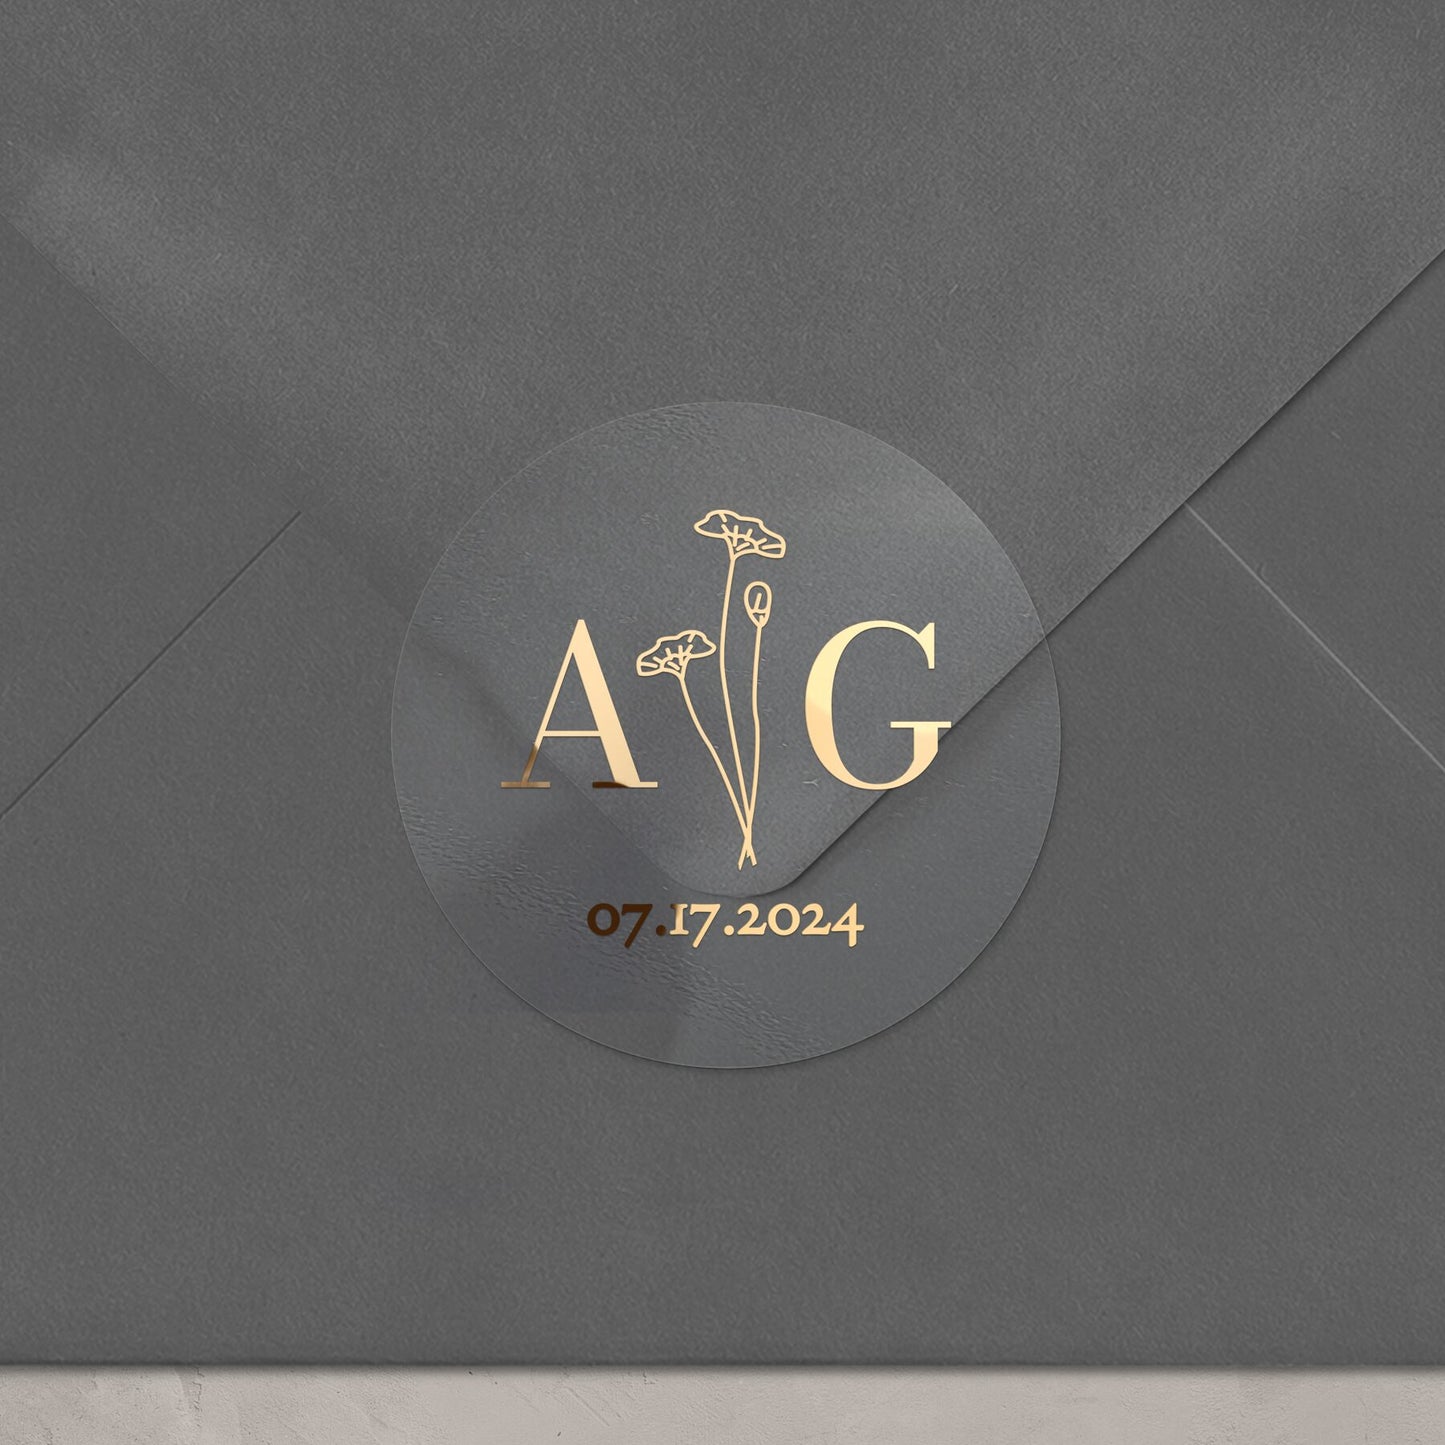 Elegant transparent sticker with initials, date and flowers for wedding invitations, seals and favors.